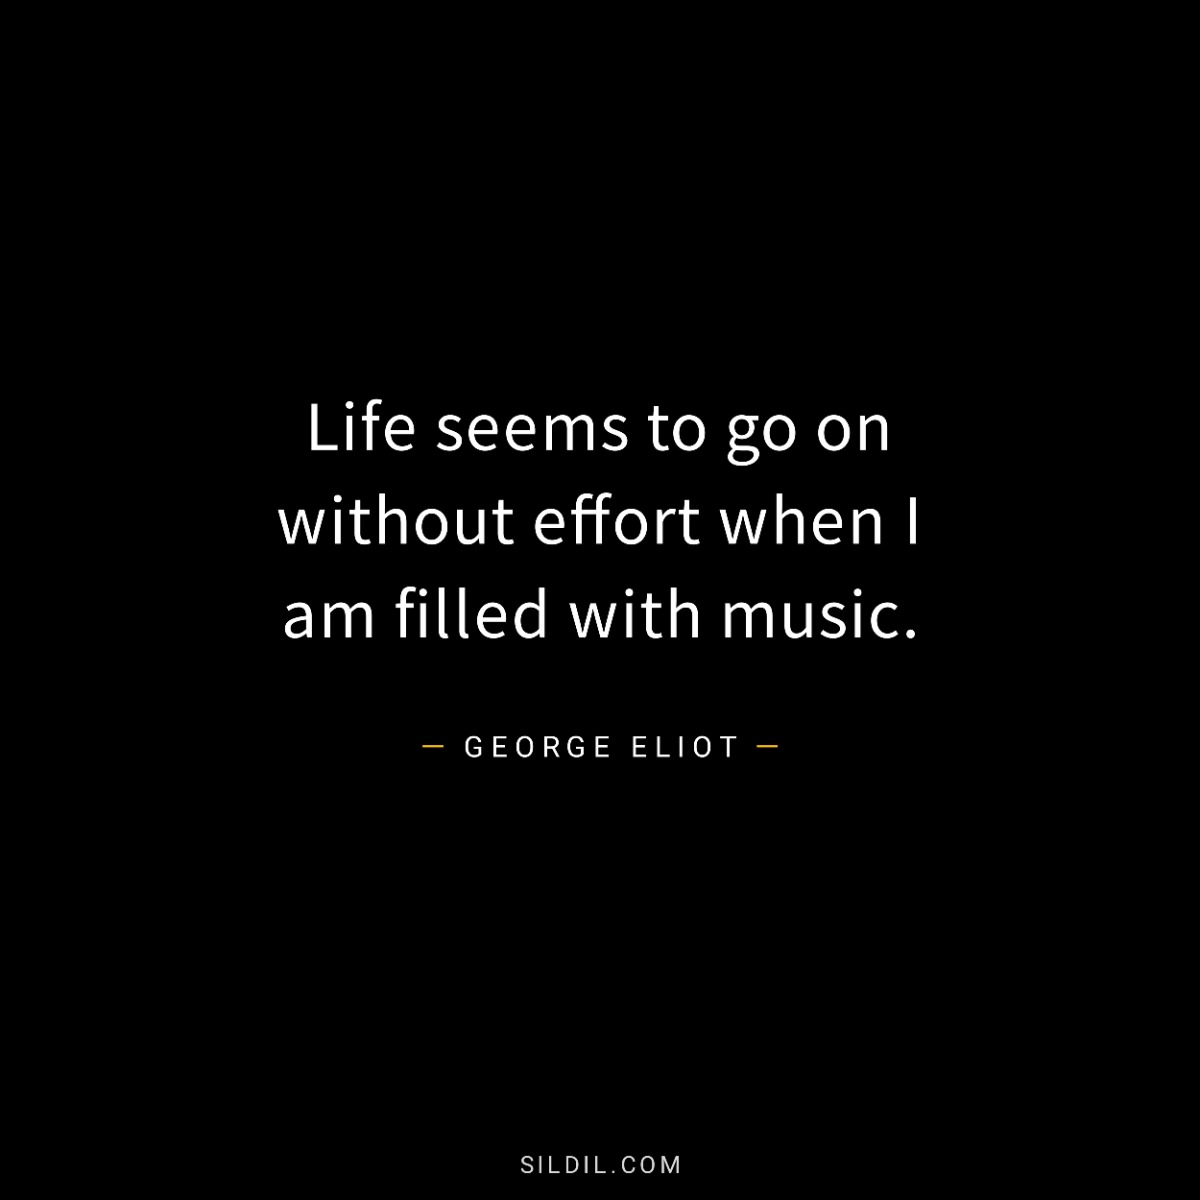 Life seems to go on without effort when I am filled with music.